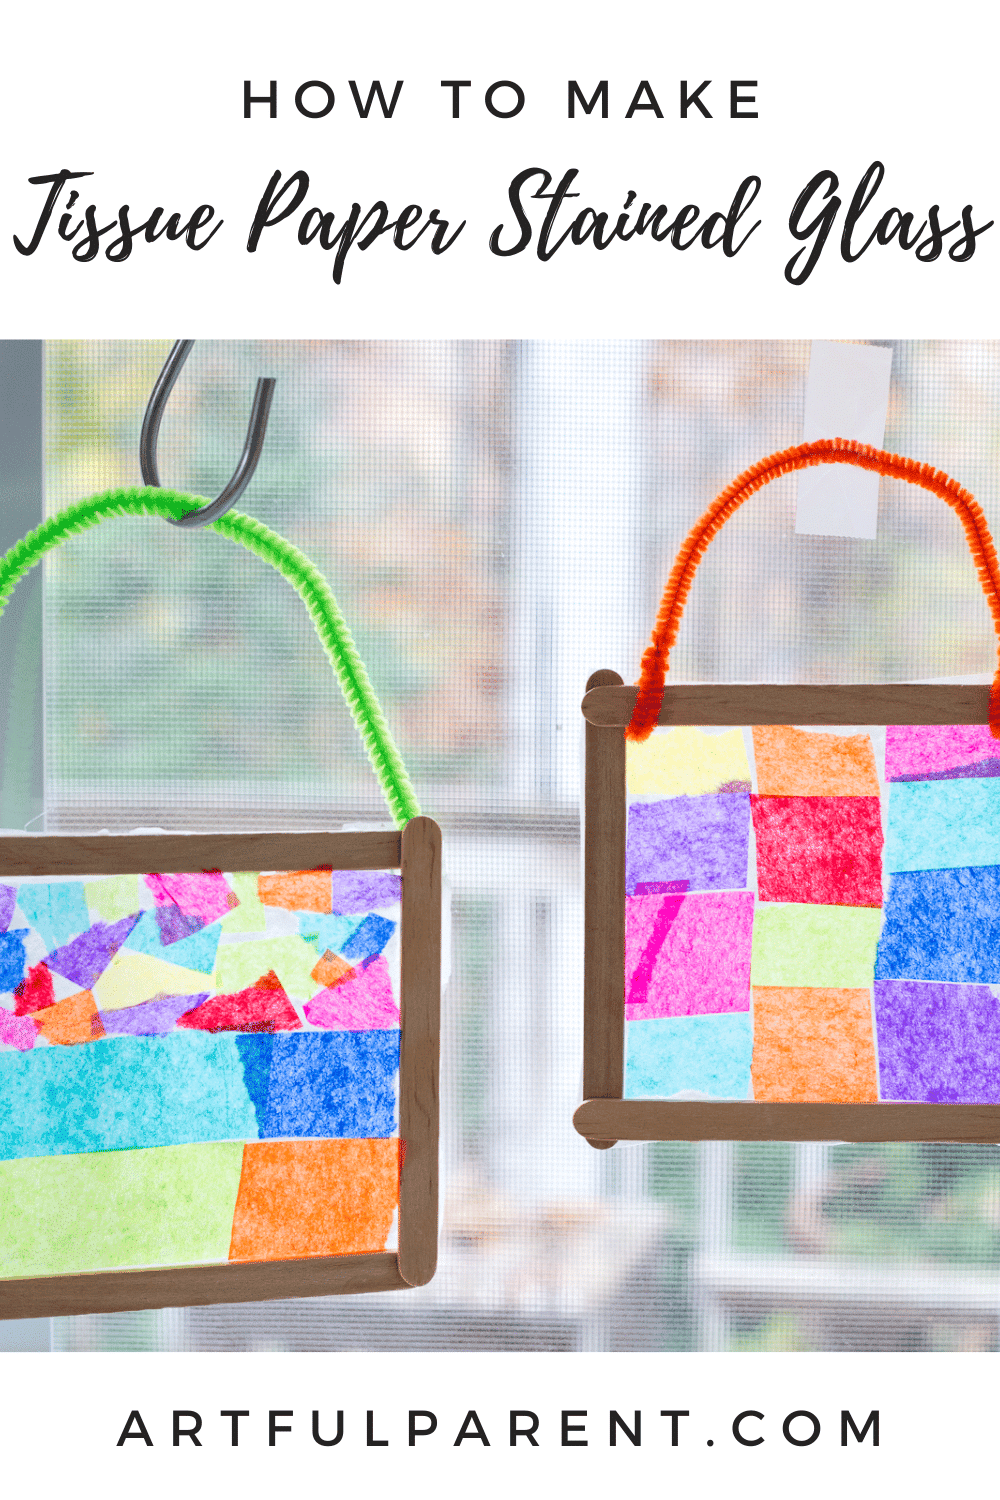 How to Make Tissue Paper Stained Glass